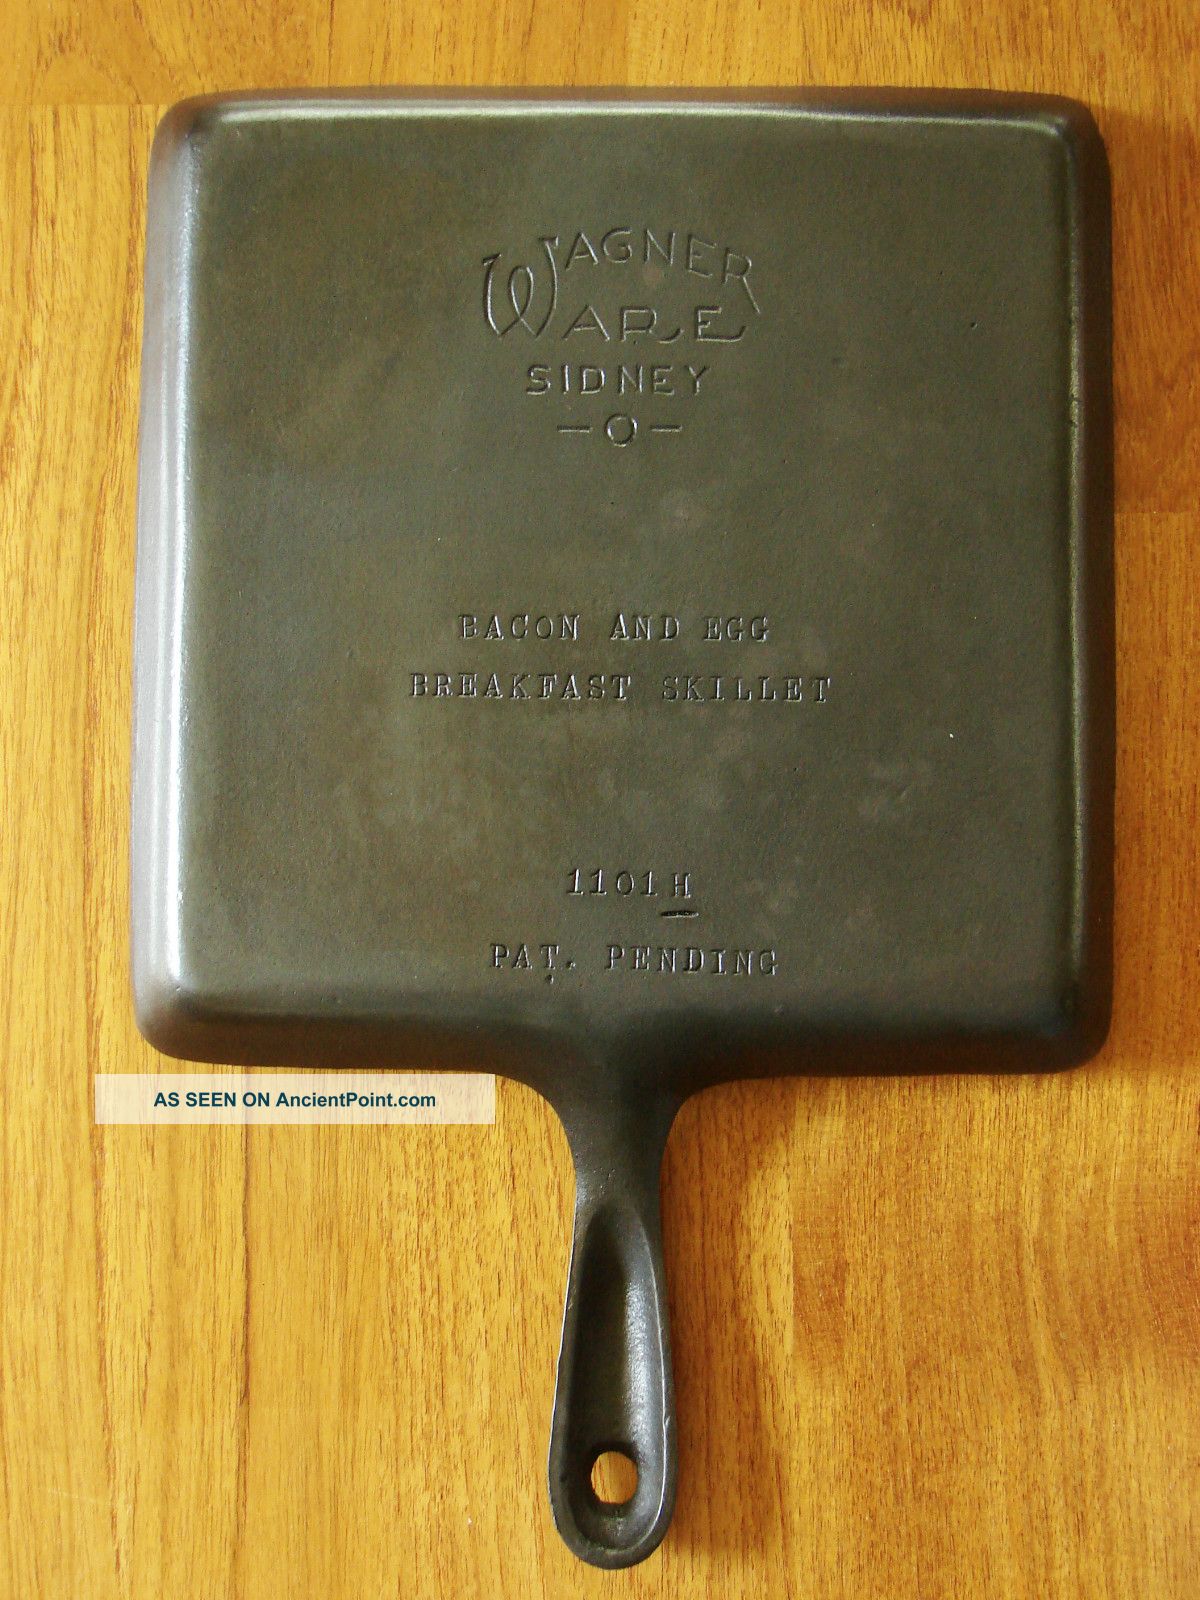 Vintage 1925 Wagner Ware Sidney O 1101 H Bacon & Egg Breakfast Skillet Cast Iron Hearth Ware photo